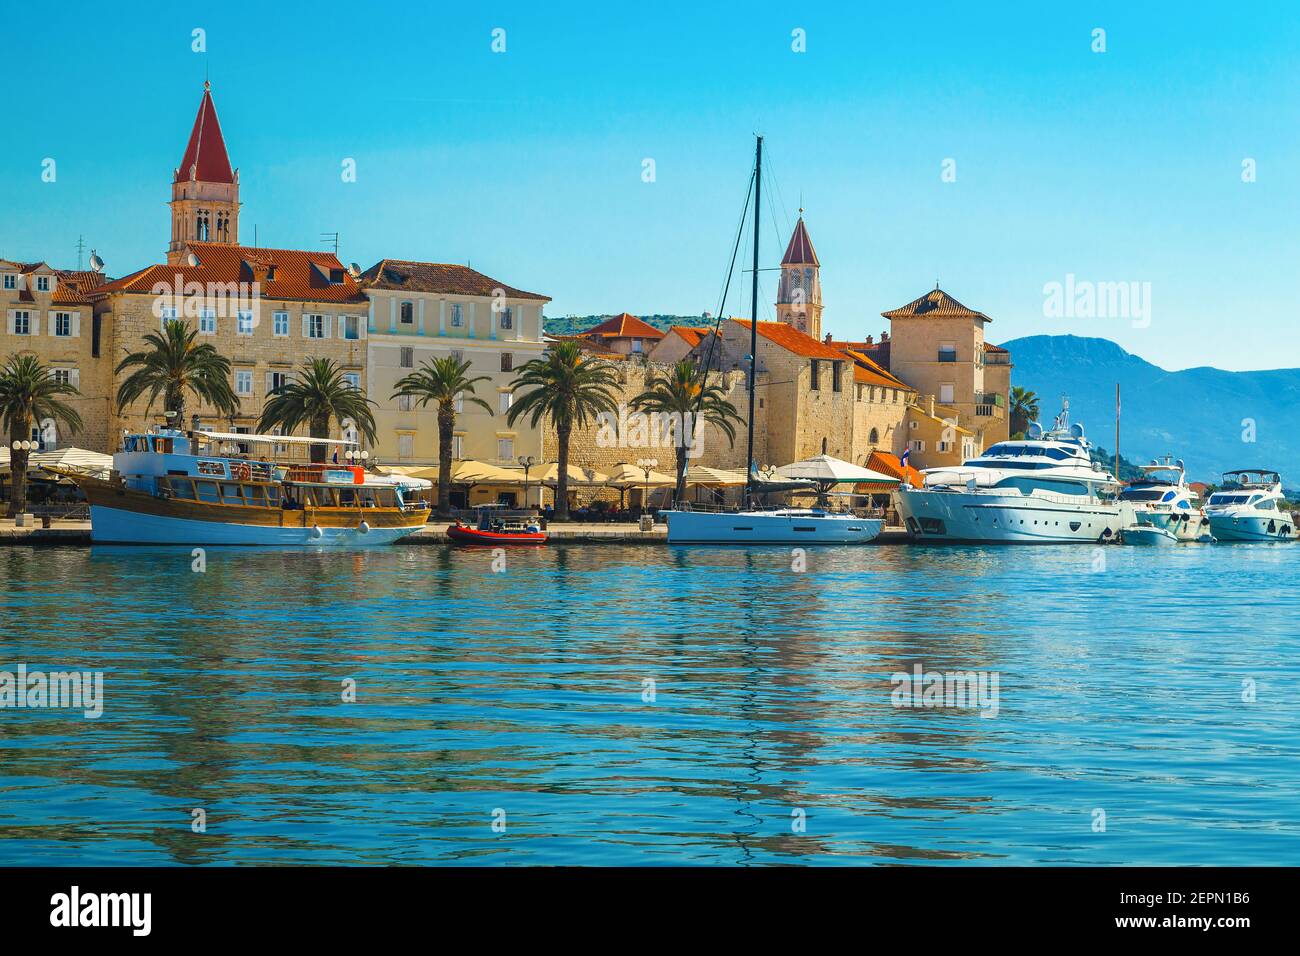 Beautiful view with luxury yachts and boats in the touristic harbor. Popular waterfront promenade with palms and street cafes, Trogir, Dalmatia, Croat Stock Photo